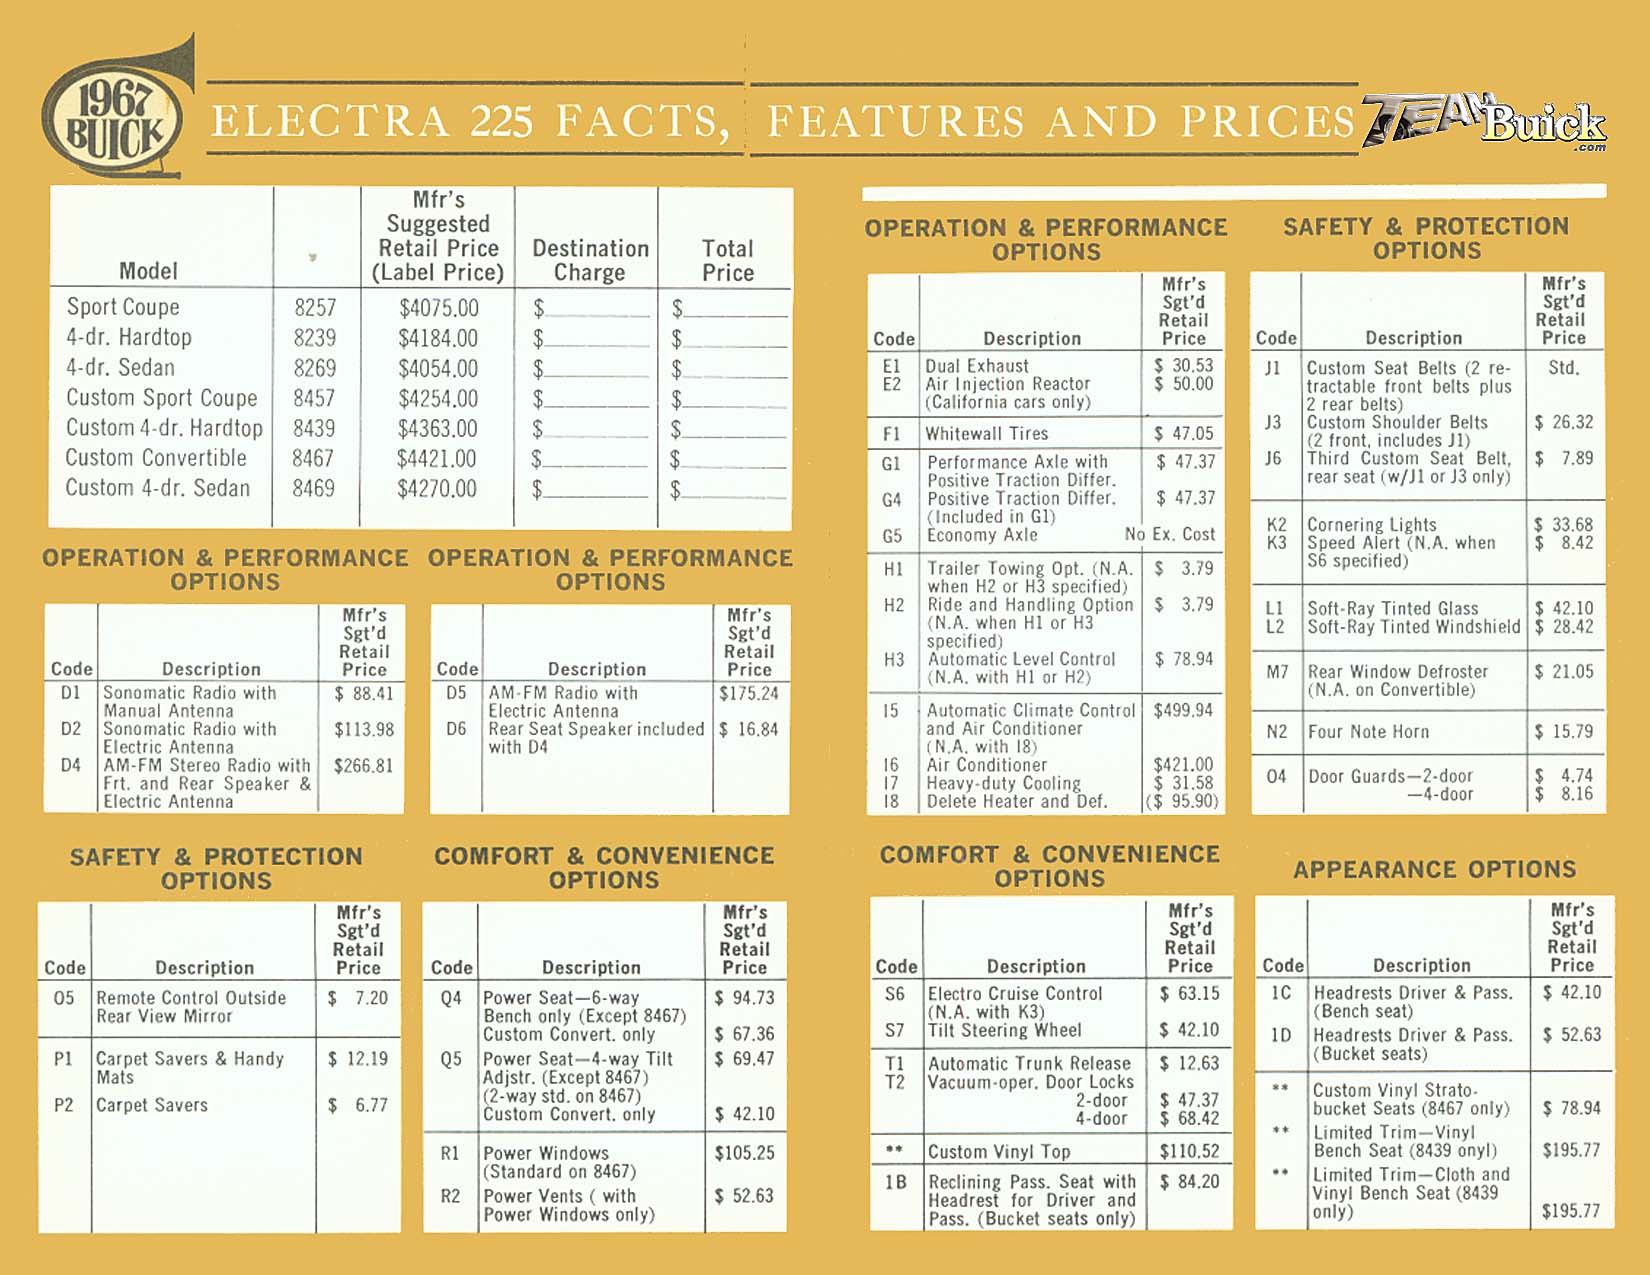 1967 Buick Electra Options and Codes